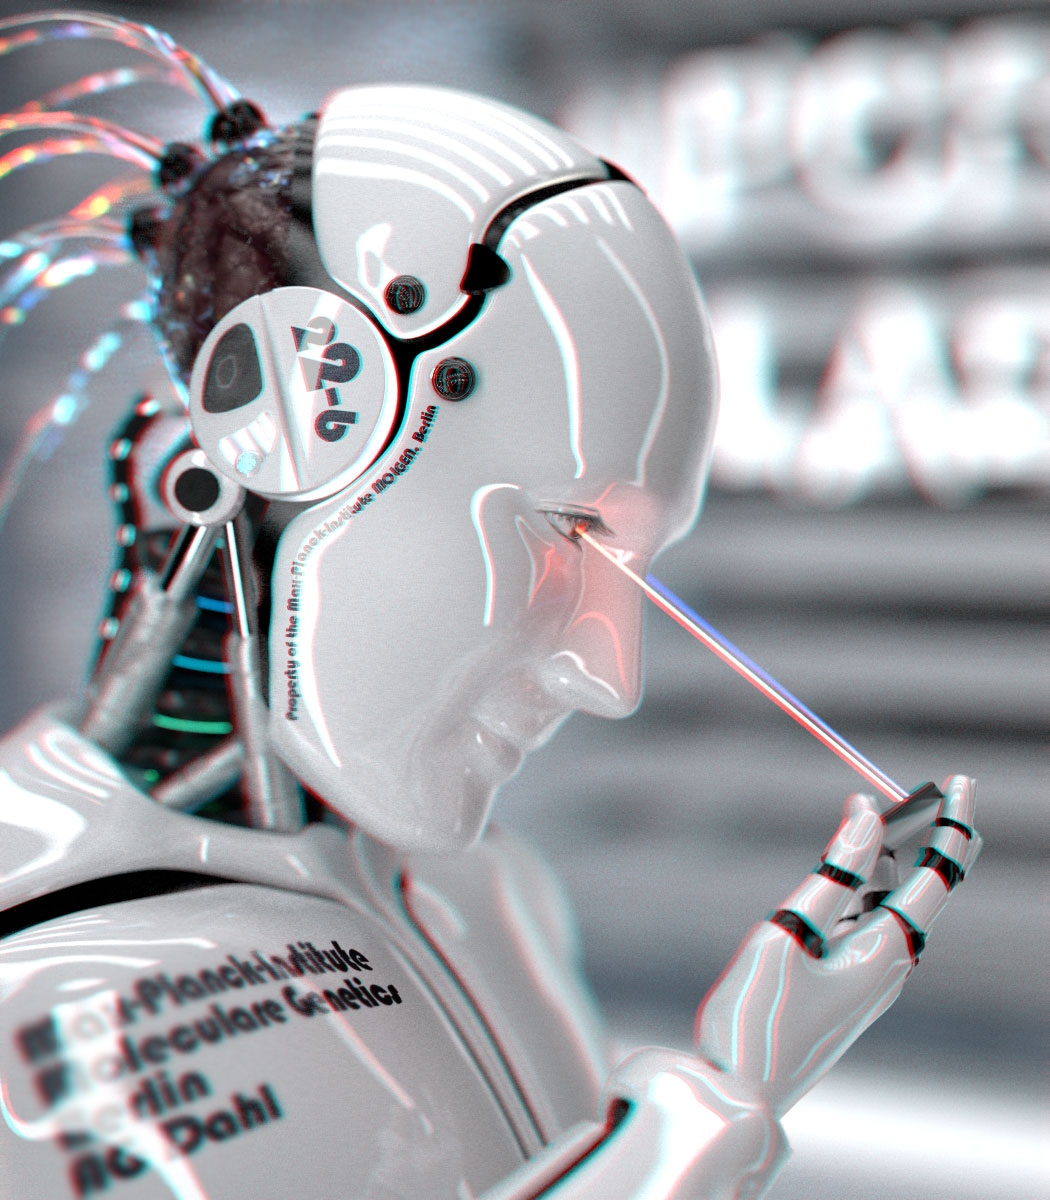 Anaglyph version of a robot scanning a chip